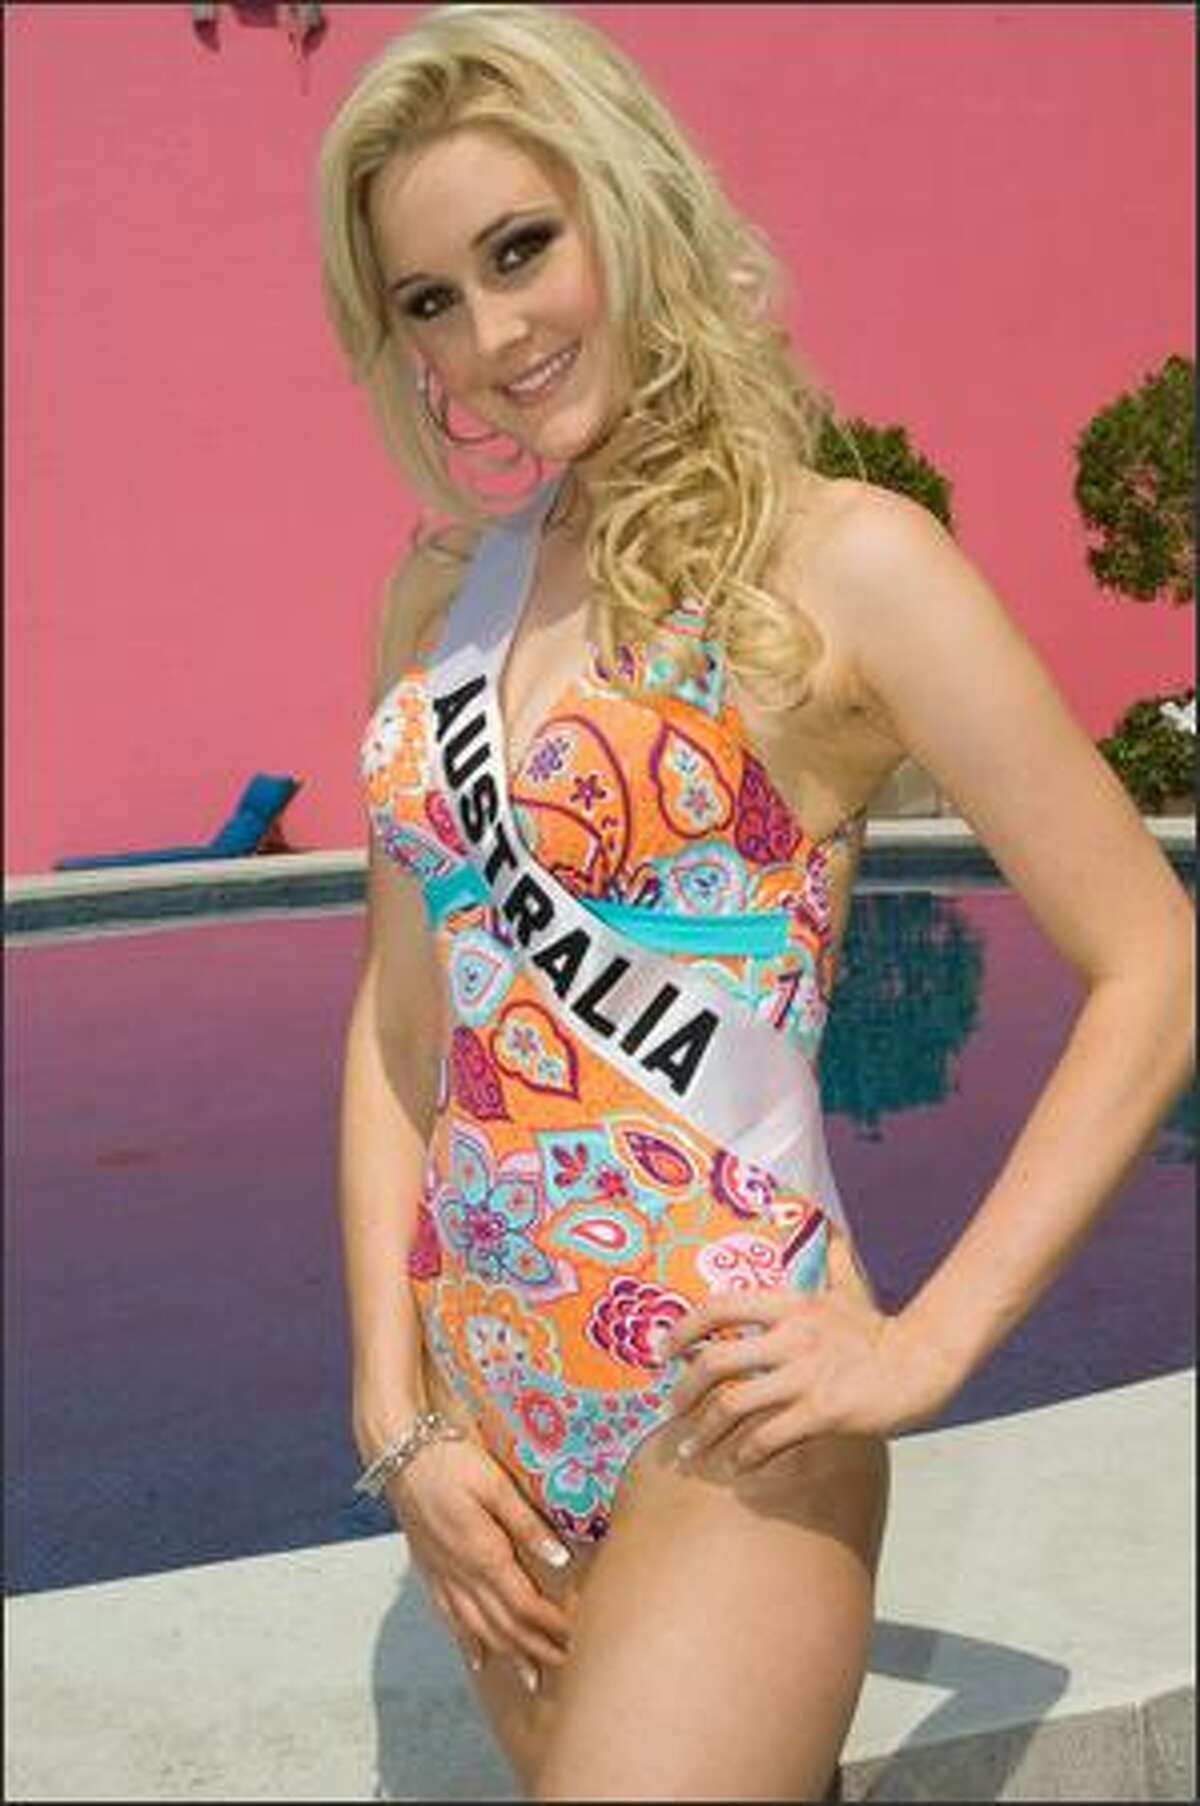 Kimberley Busteed, Miss Australia 2007, poses in her BSC Swimwear Thailand swimsuit during registration and fittings for the Miss Universe 2007 competition at the Camino Real Mexico in Mexico City on May 2.